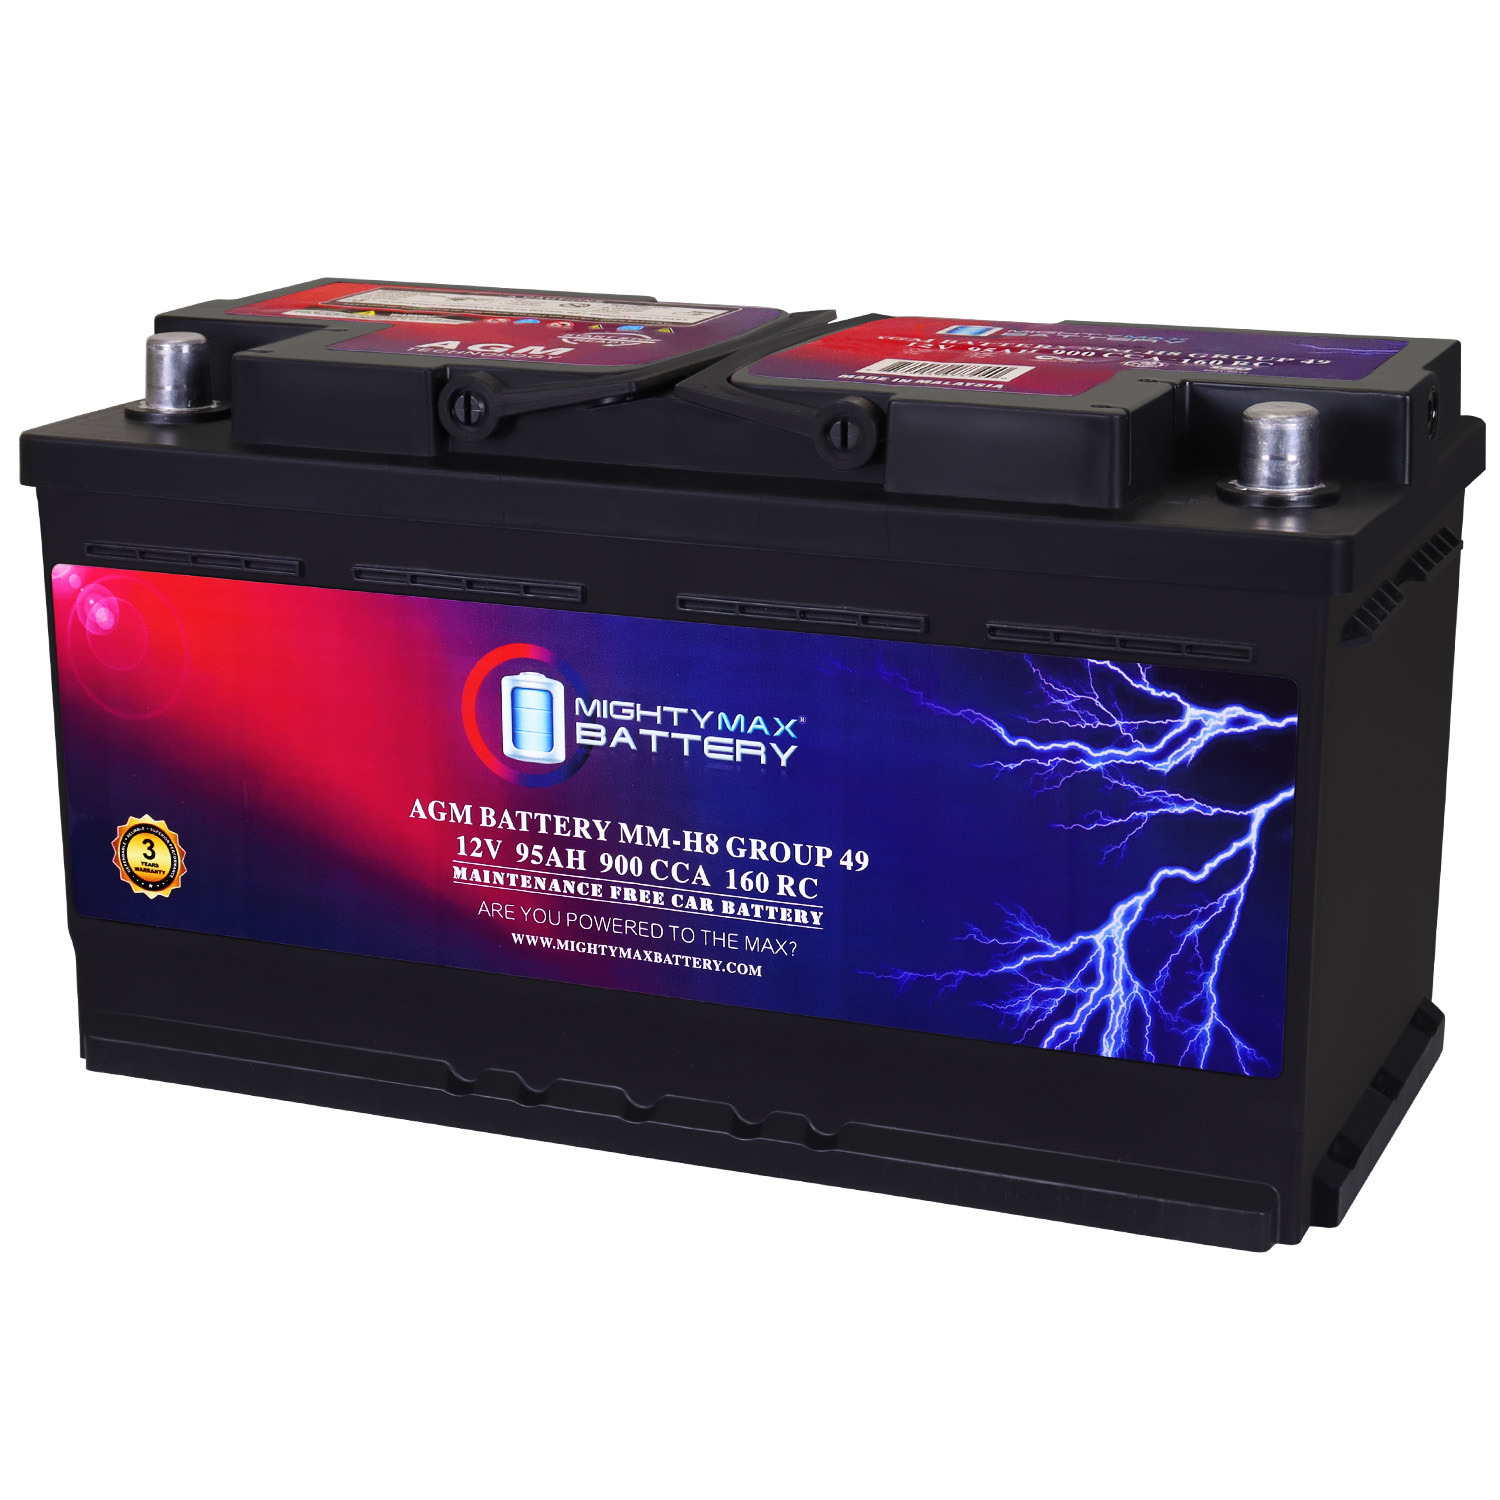 MM-H8 Group 49 12V 95Ah 160RC 900CCA Replacement Battery Compatible with Mercedes-Benz R500 11